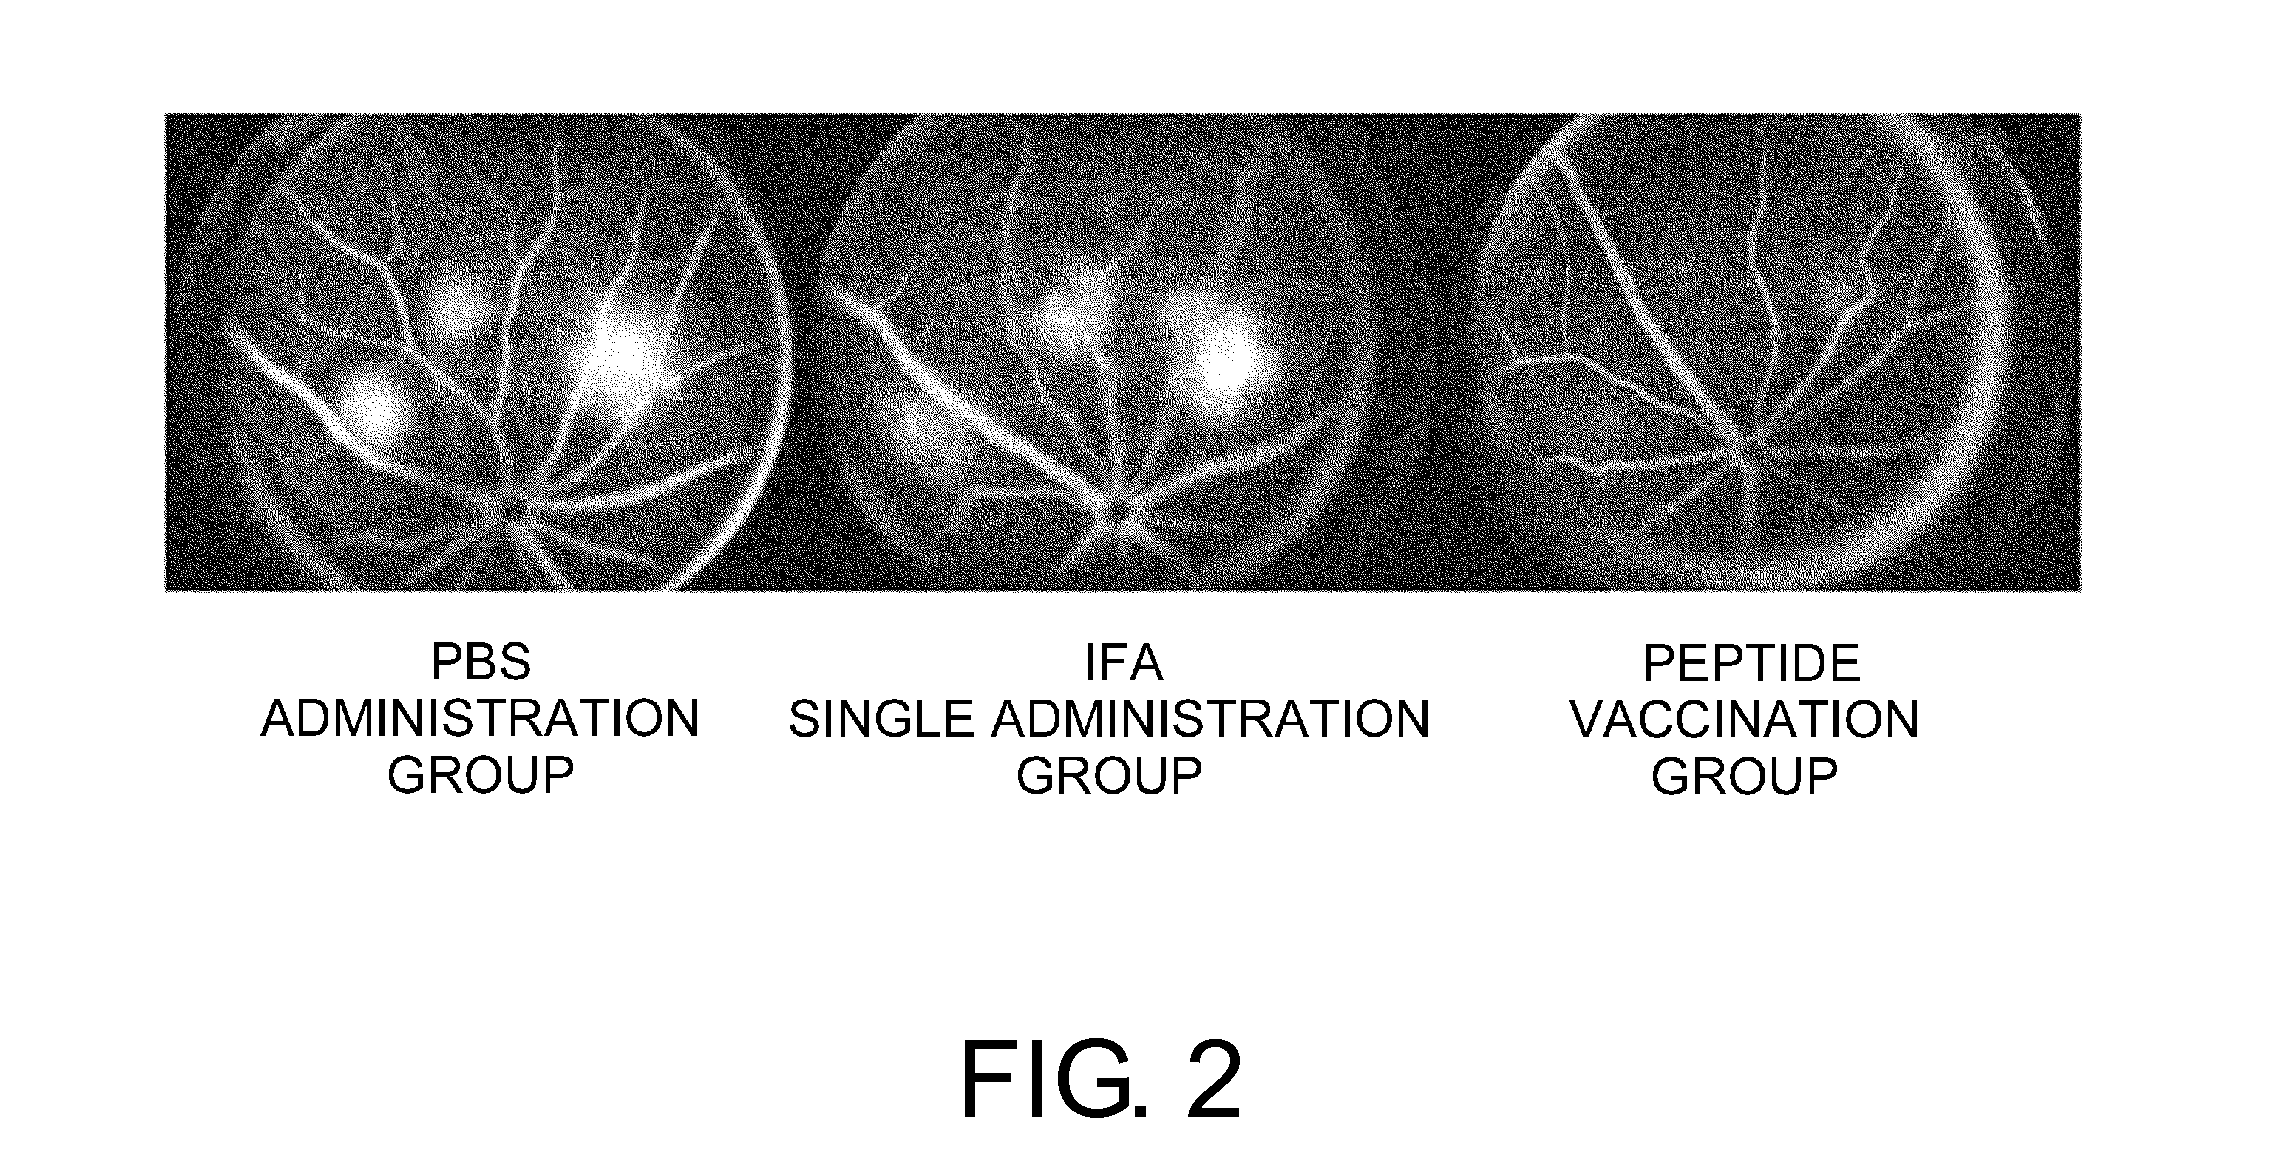 Vaccine therapy for choroidal neovascularization